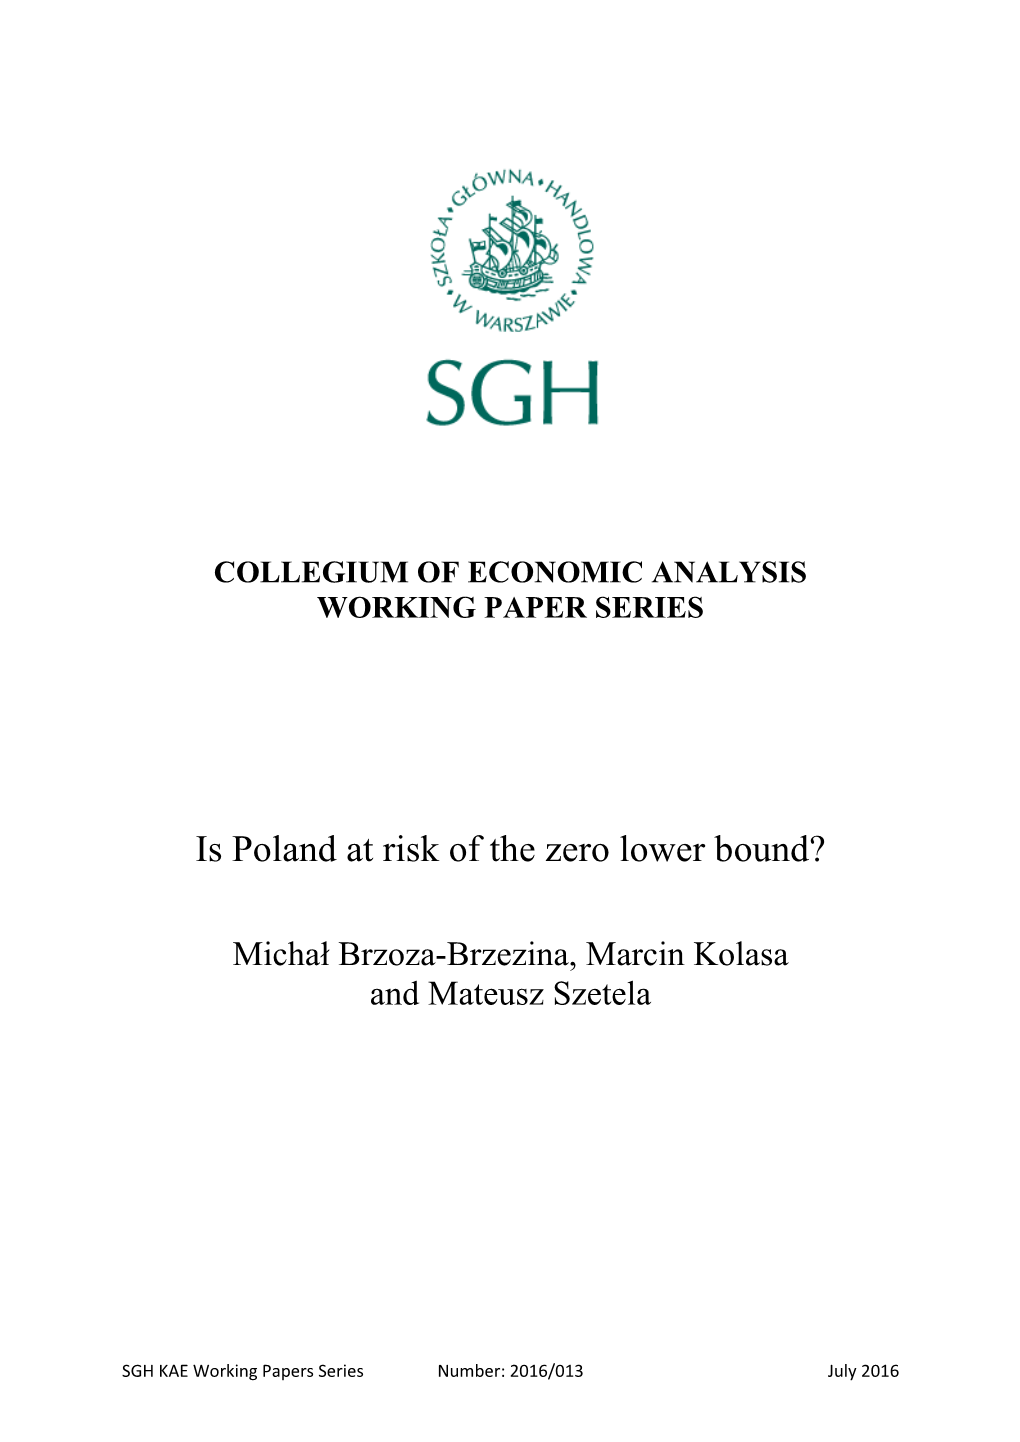 Is Poland at Risk of the Zero Lower Bound?